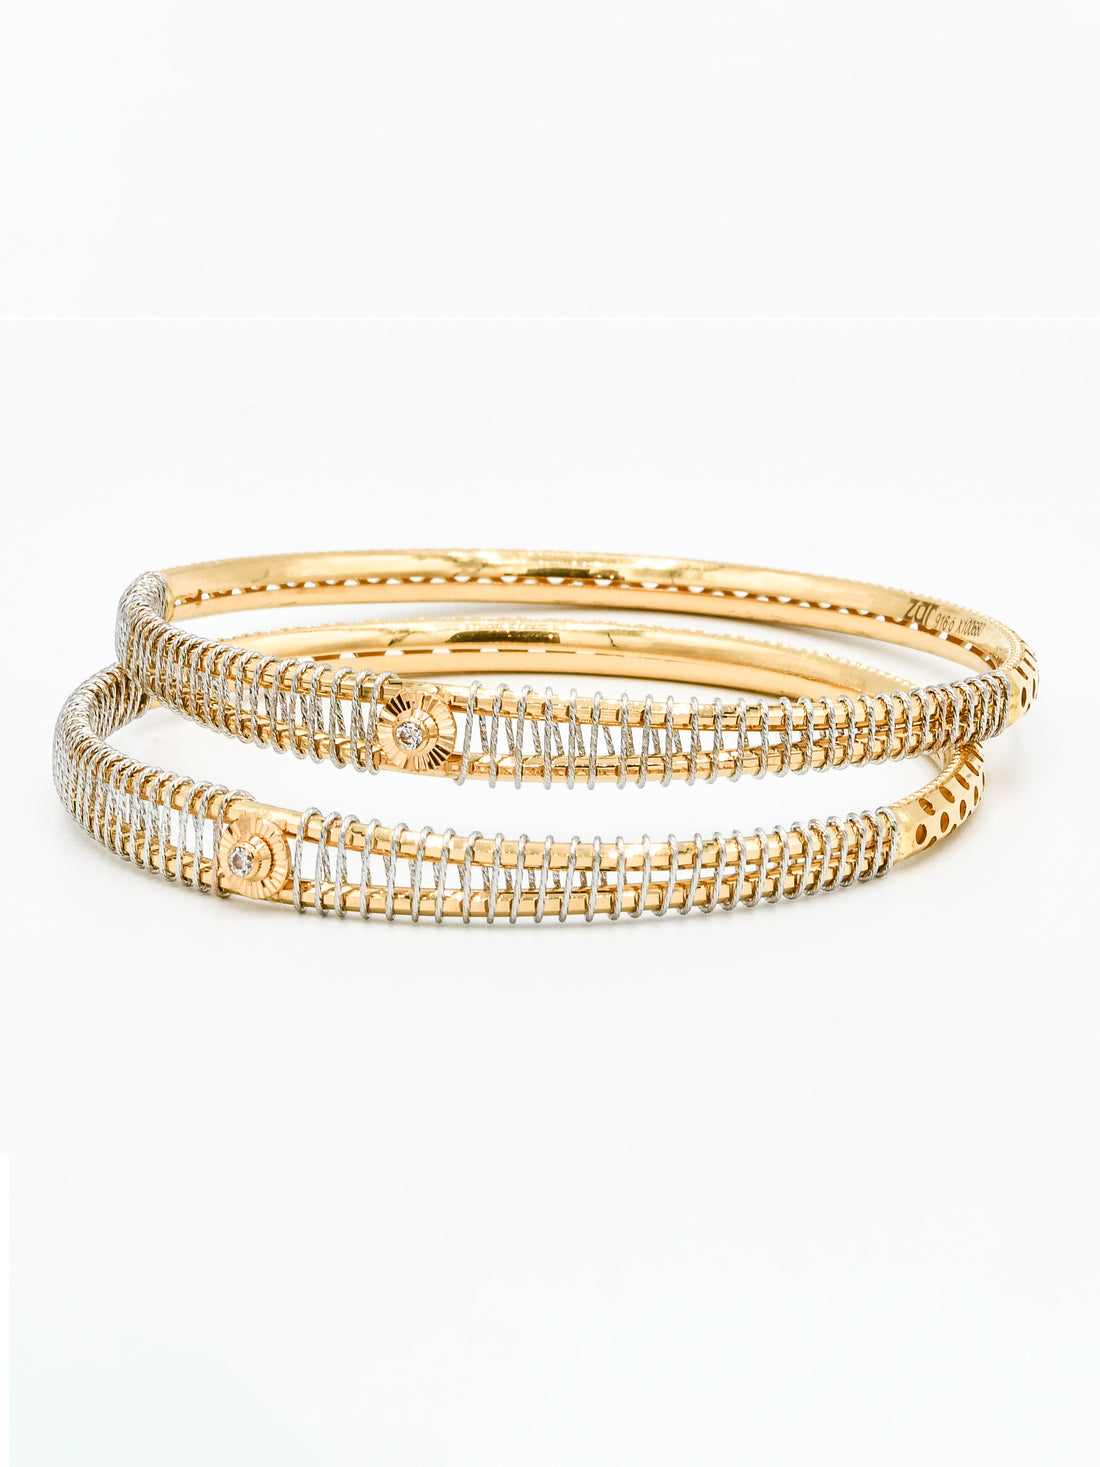 22ct Gold CZ Two Tone 2 Piece Bangle - Roop Darshan